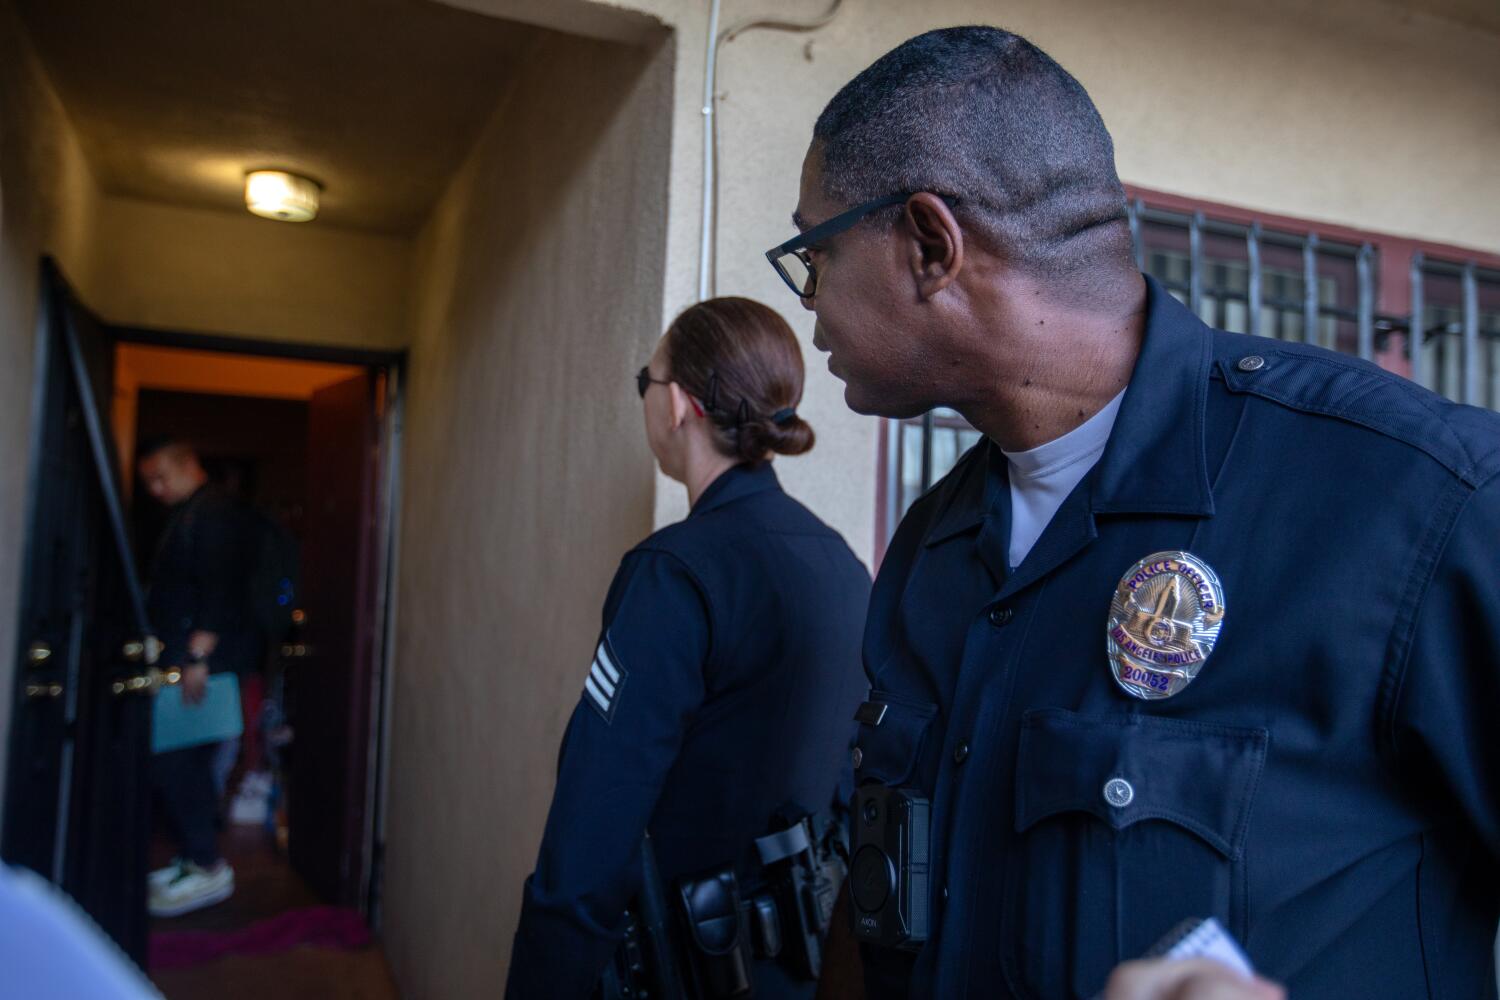 L.A. tests program to send unarmed civilians instead of cops to people in crisis